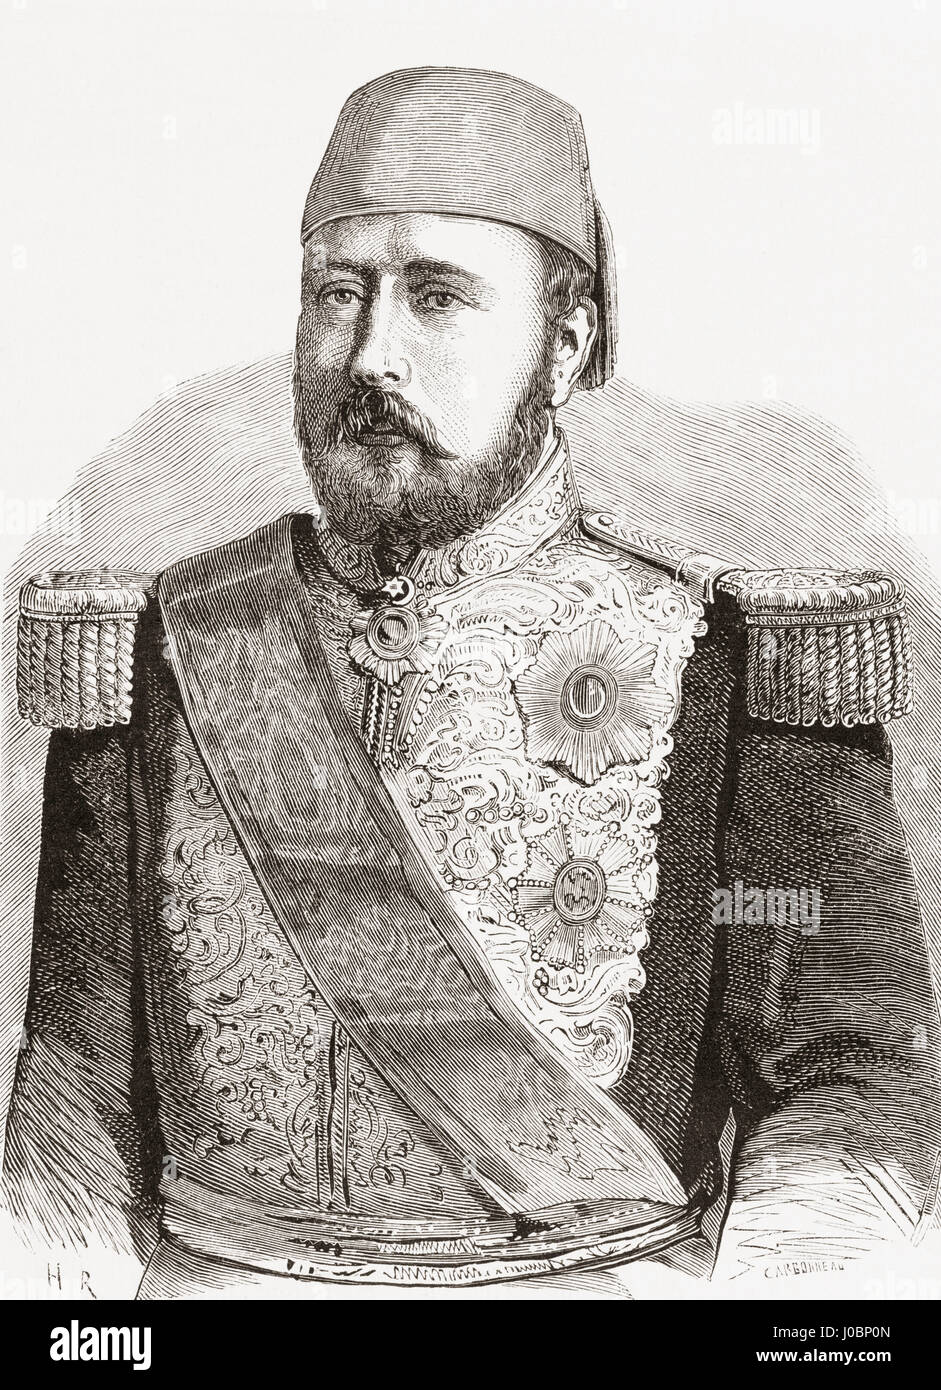 Isma'il Pasha, aka  Ismail the Magnificent, 1830 – 1895. Khedive of Egypt and Sudan from 1863 to 1879.  From L'Univers Illustre published 1867. Stock Photo